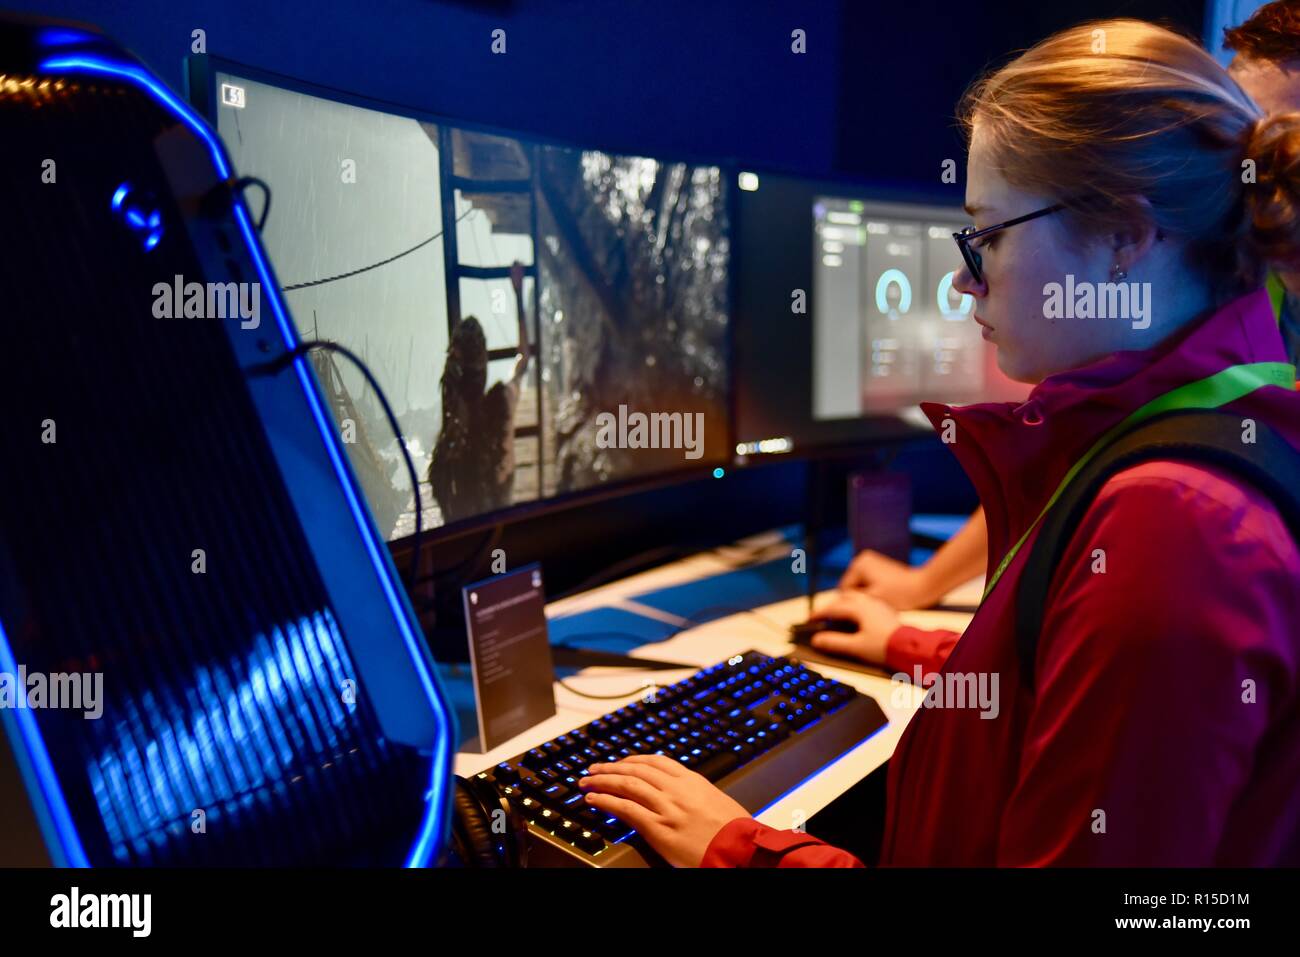 Young woman playing video game on Dell computer, CES (Consumer Electronics Show), the world’s largest technology trade show, held in Las Vegas, USA. Stock Photo